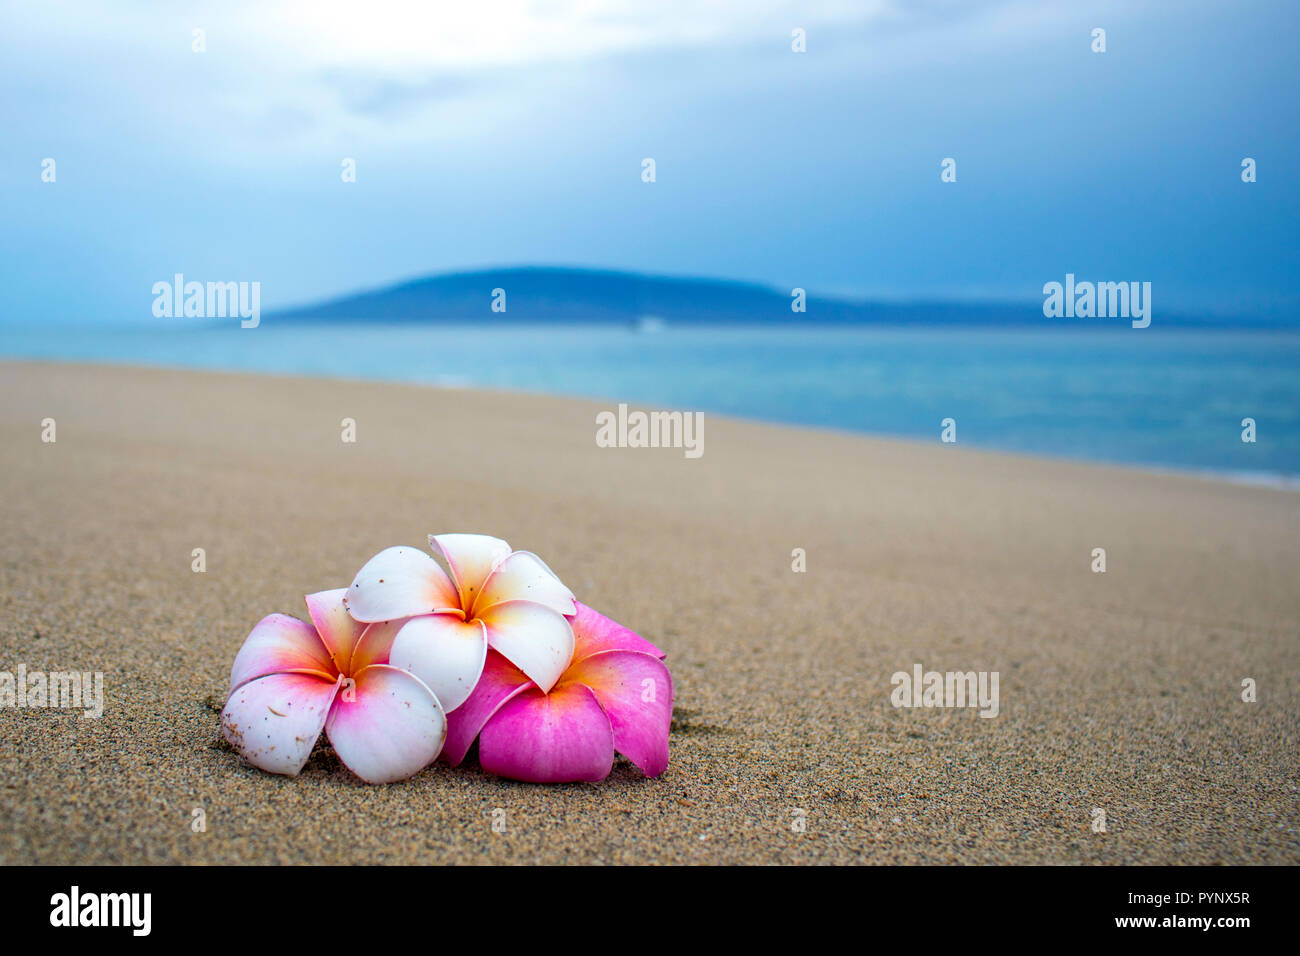 Three Tropical Flowers on Sand in Foreground with Ocean and Island on Horizon Stock Photo